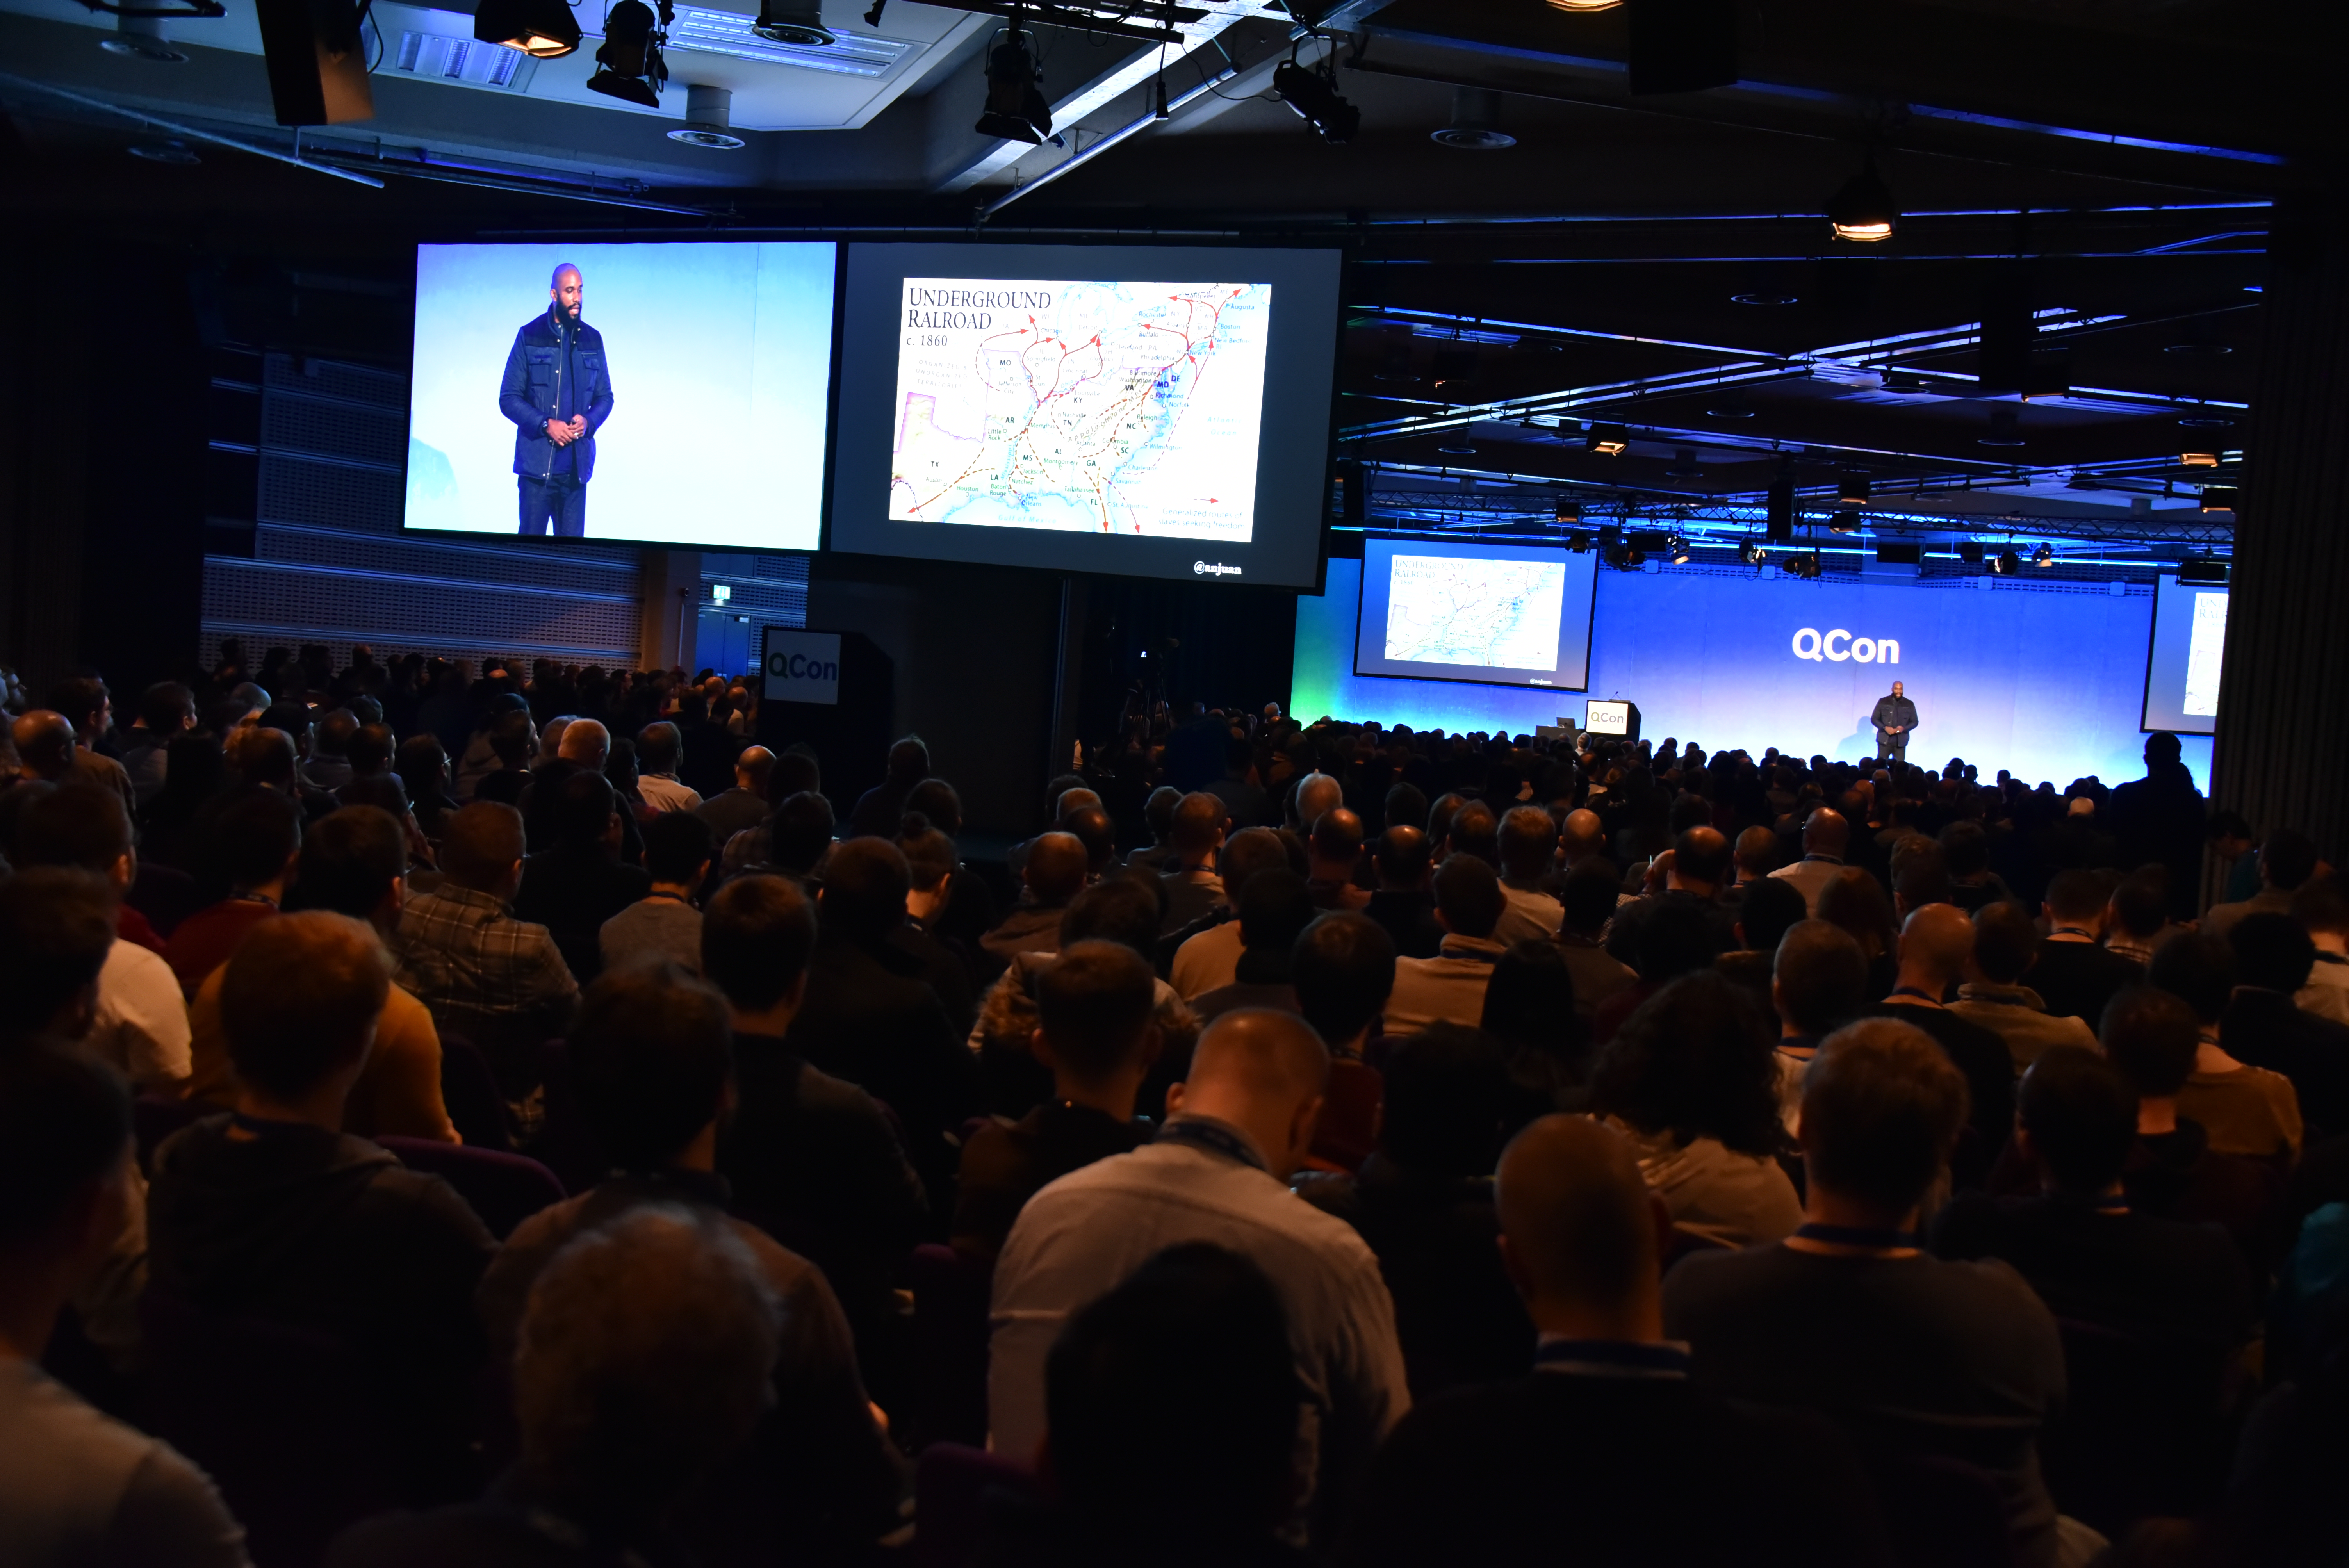 Giving my Technical Leadership Through the Underground Railroad keynote at QCon London.